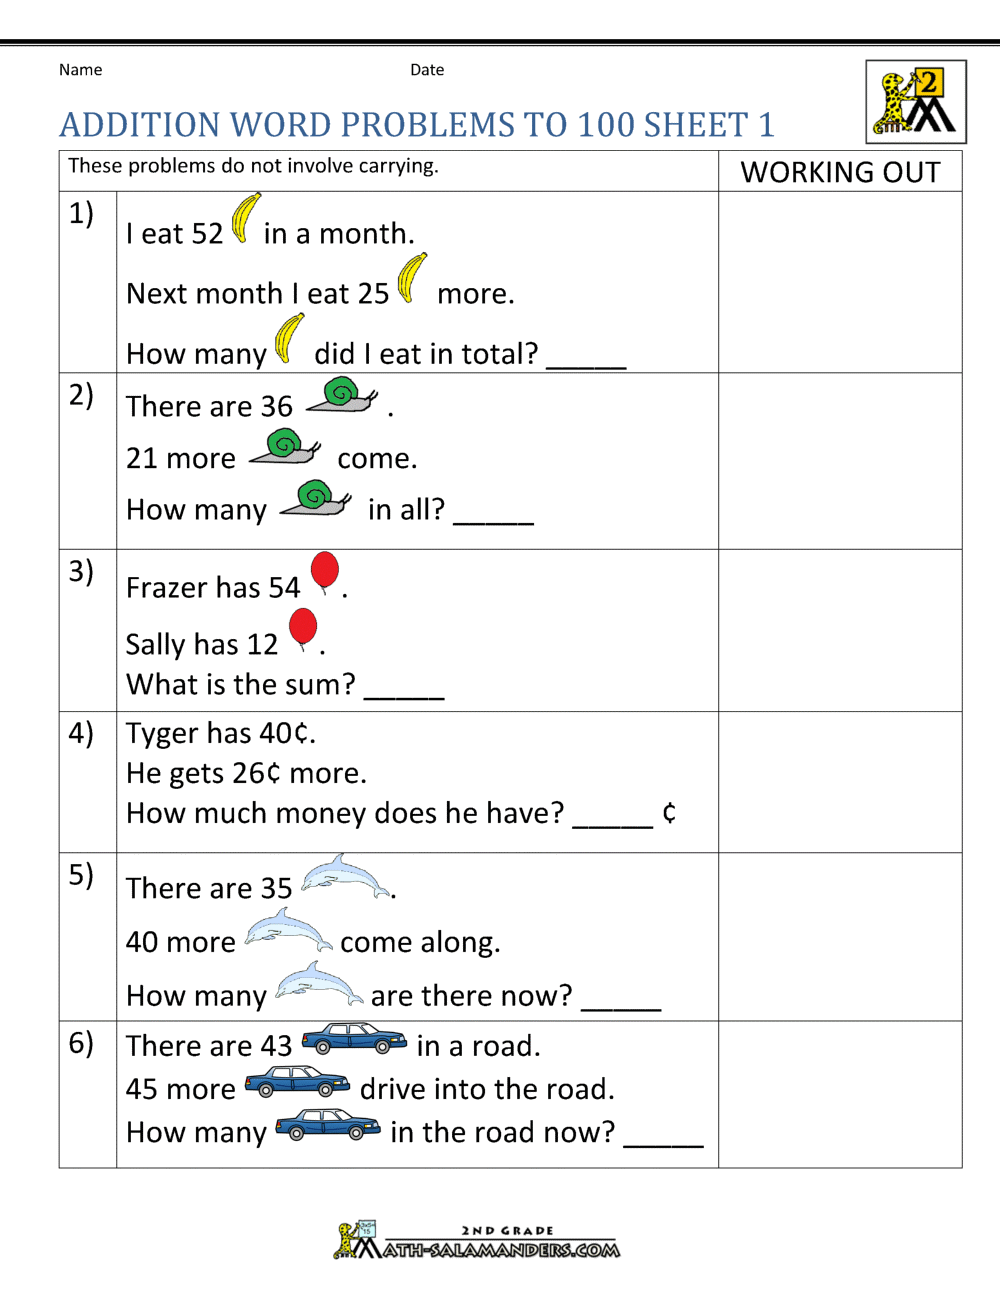 addition-word-problems-2nd-grade